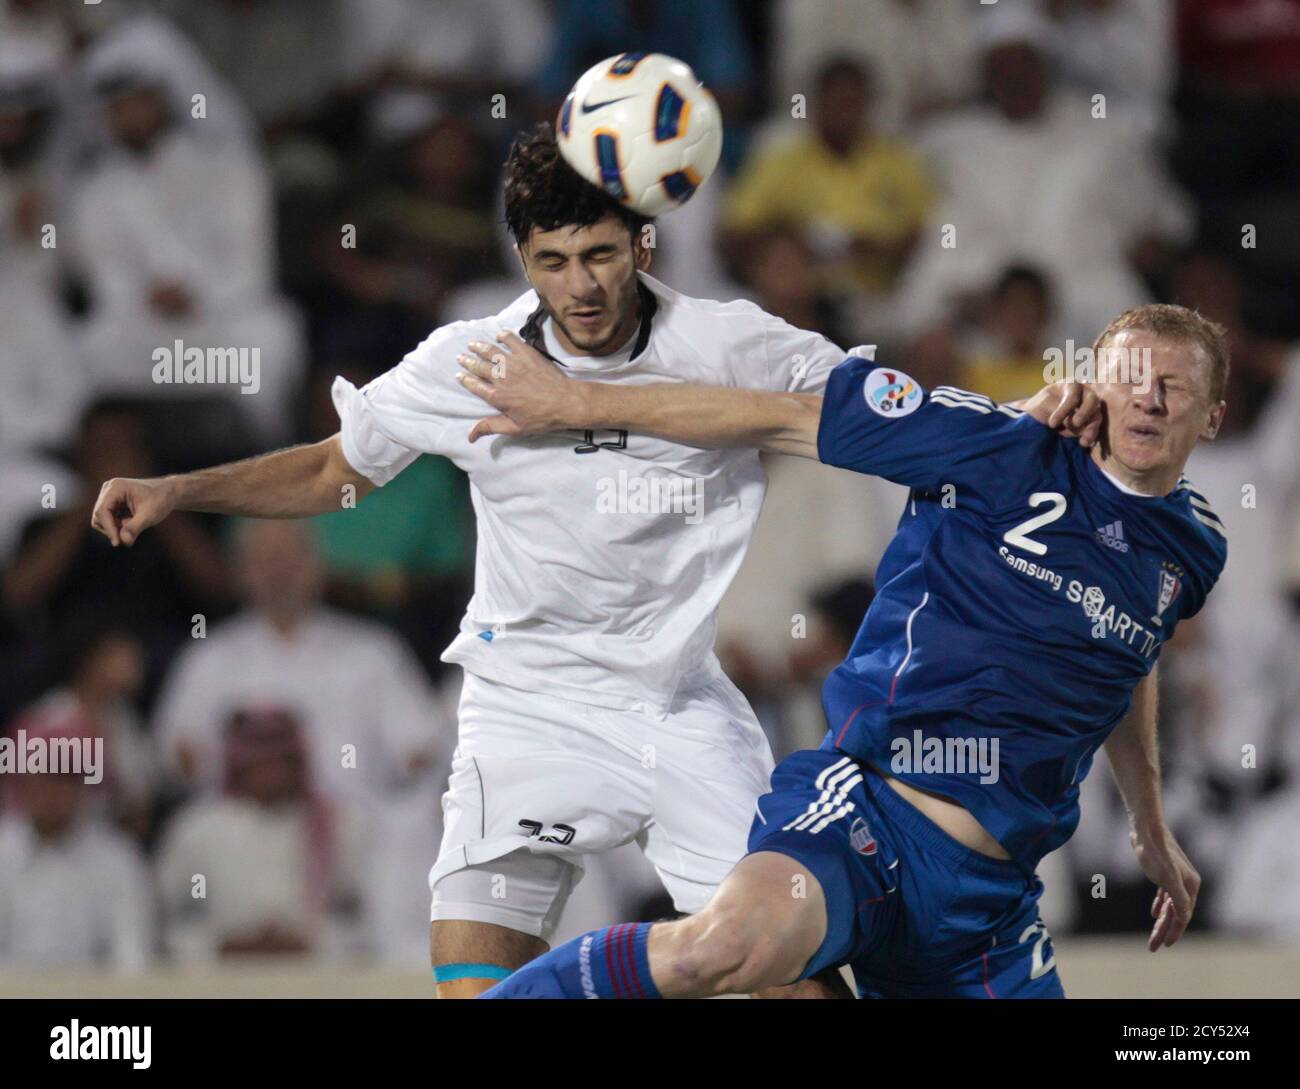 Ibrahim Majed of Qatar's Al-Sadd fights for the ball with Mato Neretljak  (R) of South Korea's Suwon Samsung Bluewings during their AFC Champions  League semi-final match in Doha October 26, 2011. REUTERS/Fadi